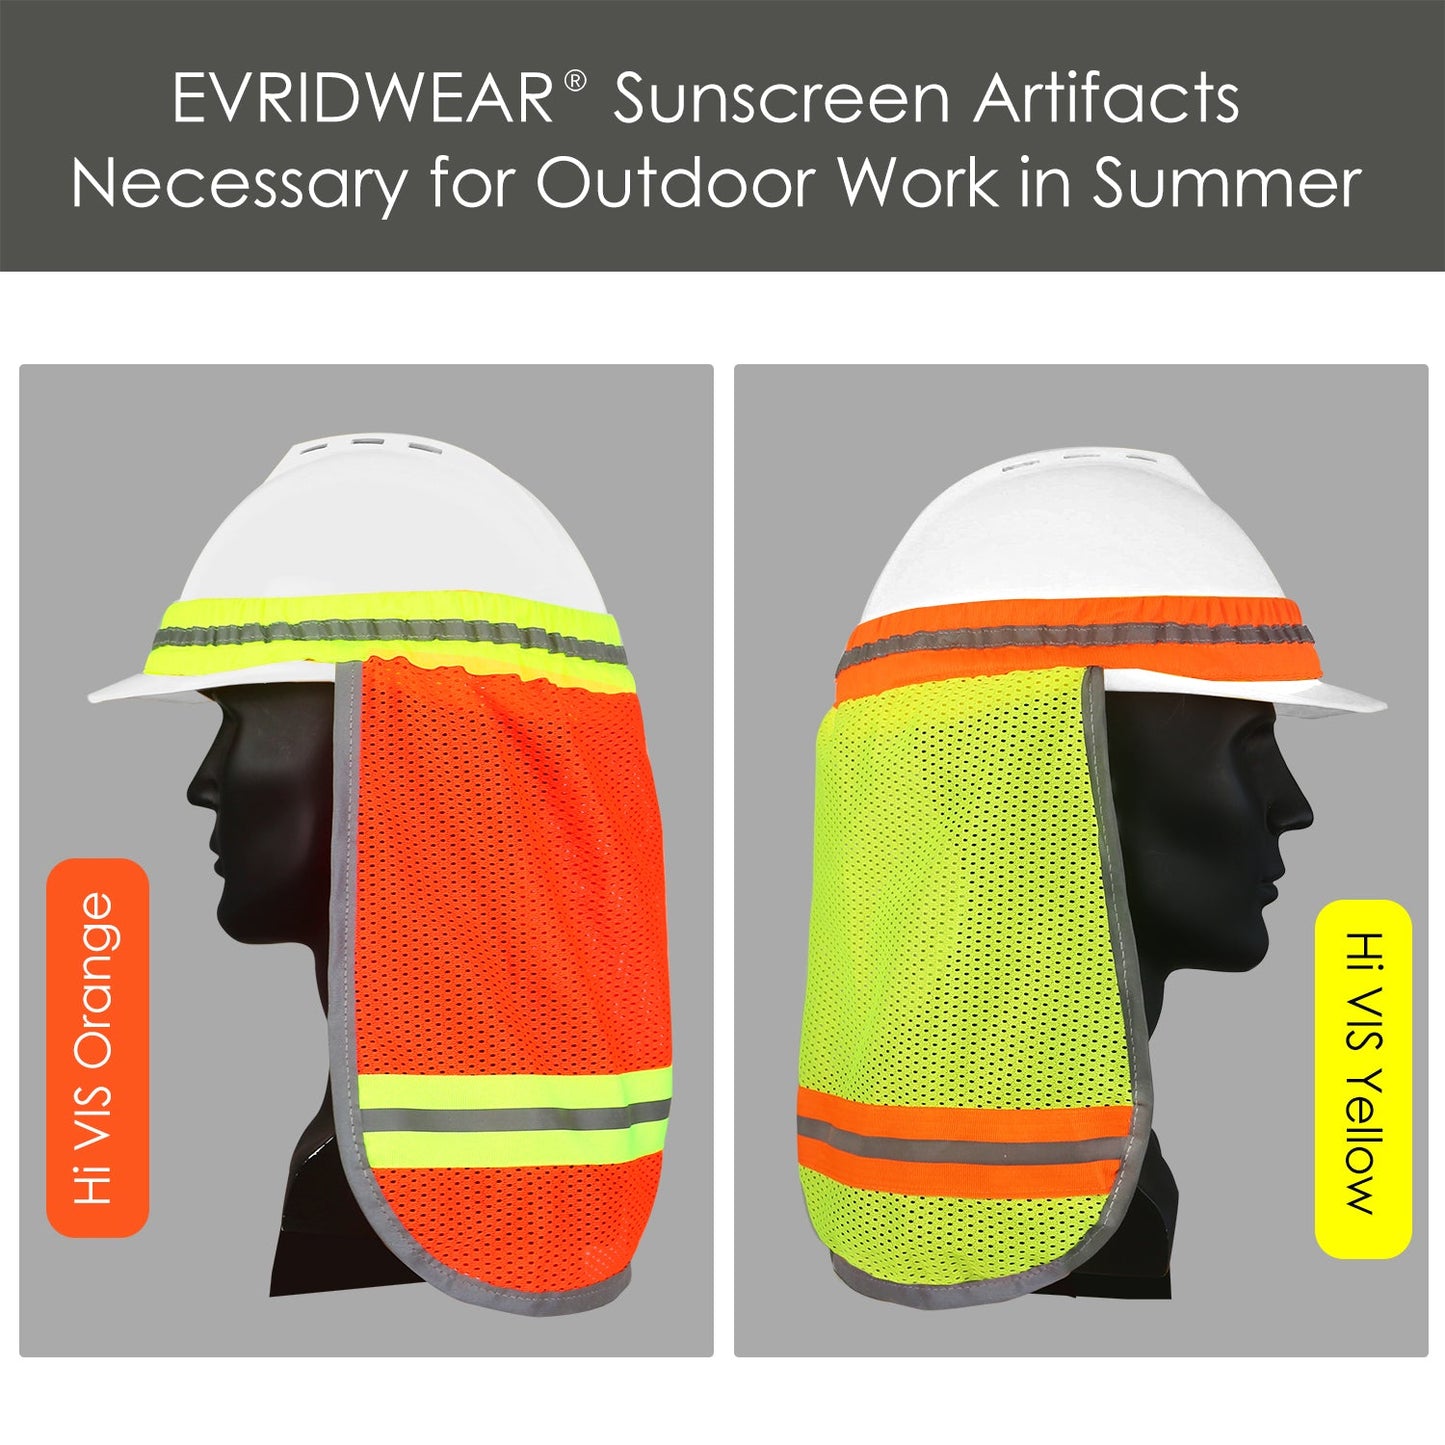 FJDZ Safety Hard Hat Sun Shade Shield for Construction, Outdoor Activities, UV Protection